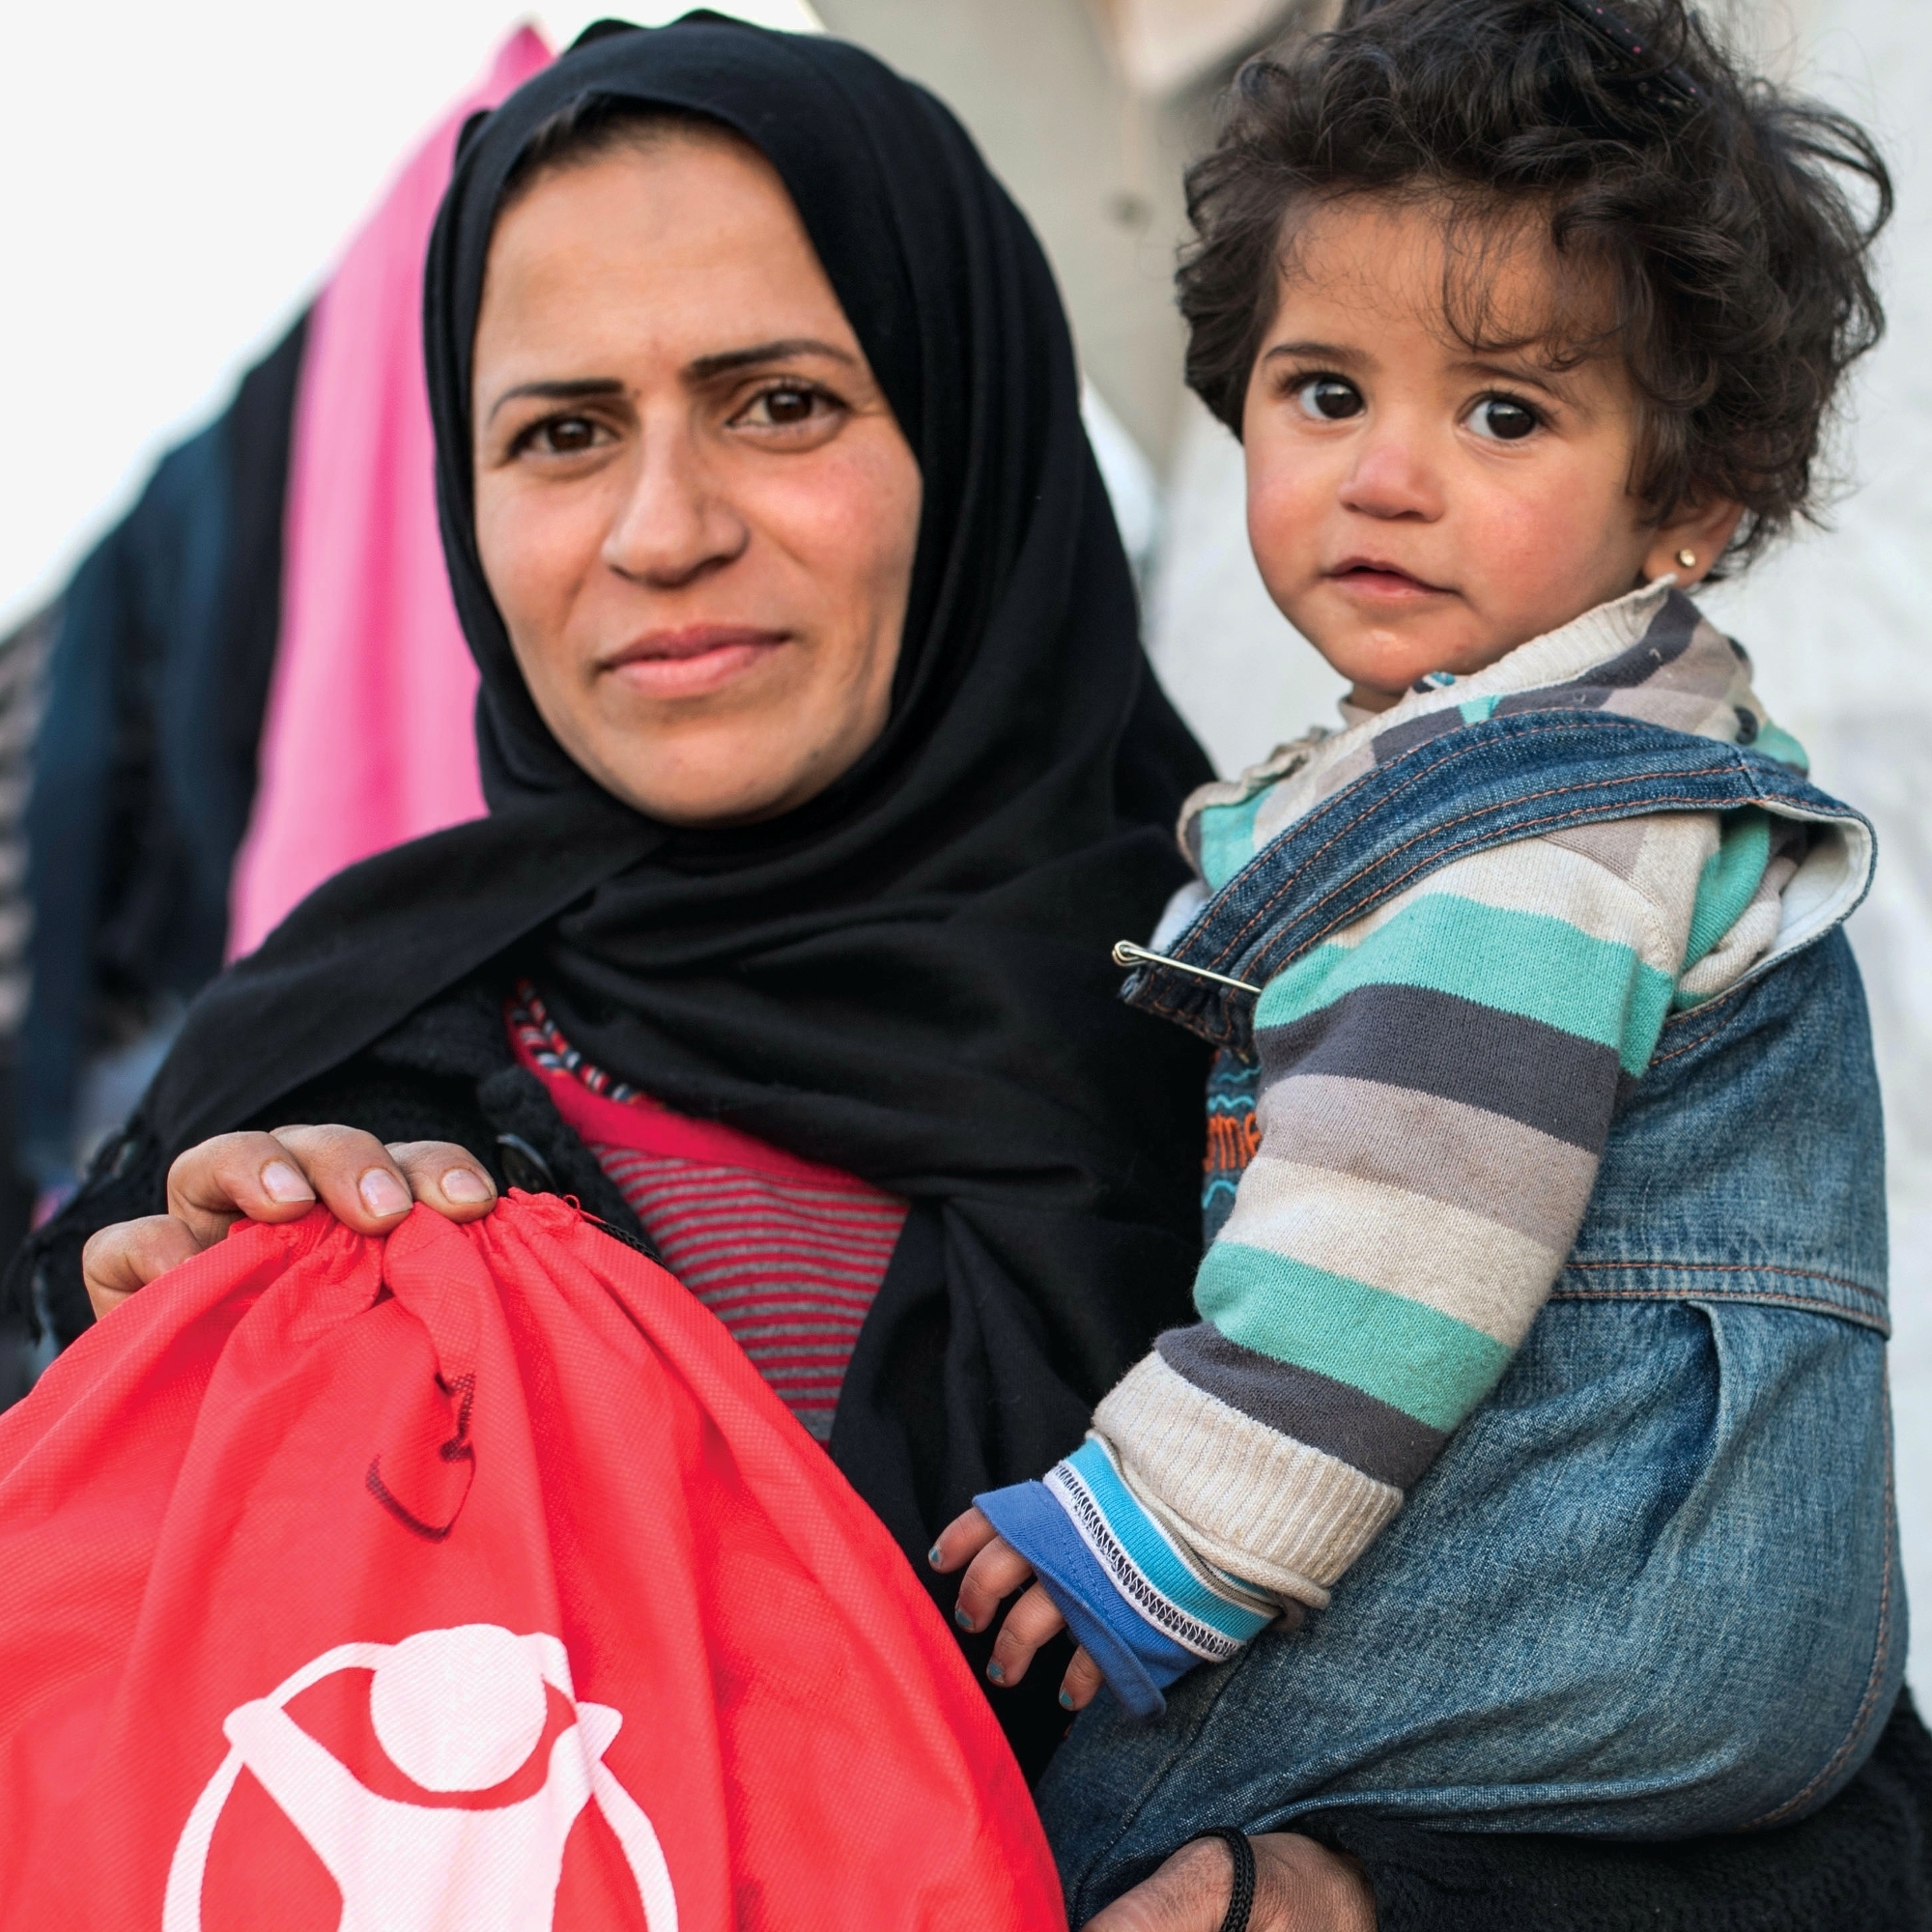 A caregiver holds a baby and a Save the Children backpack.